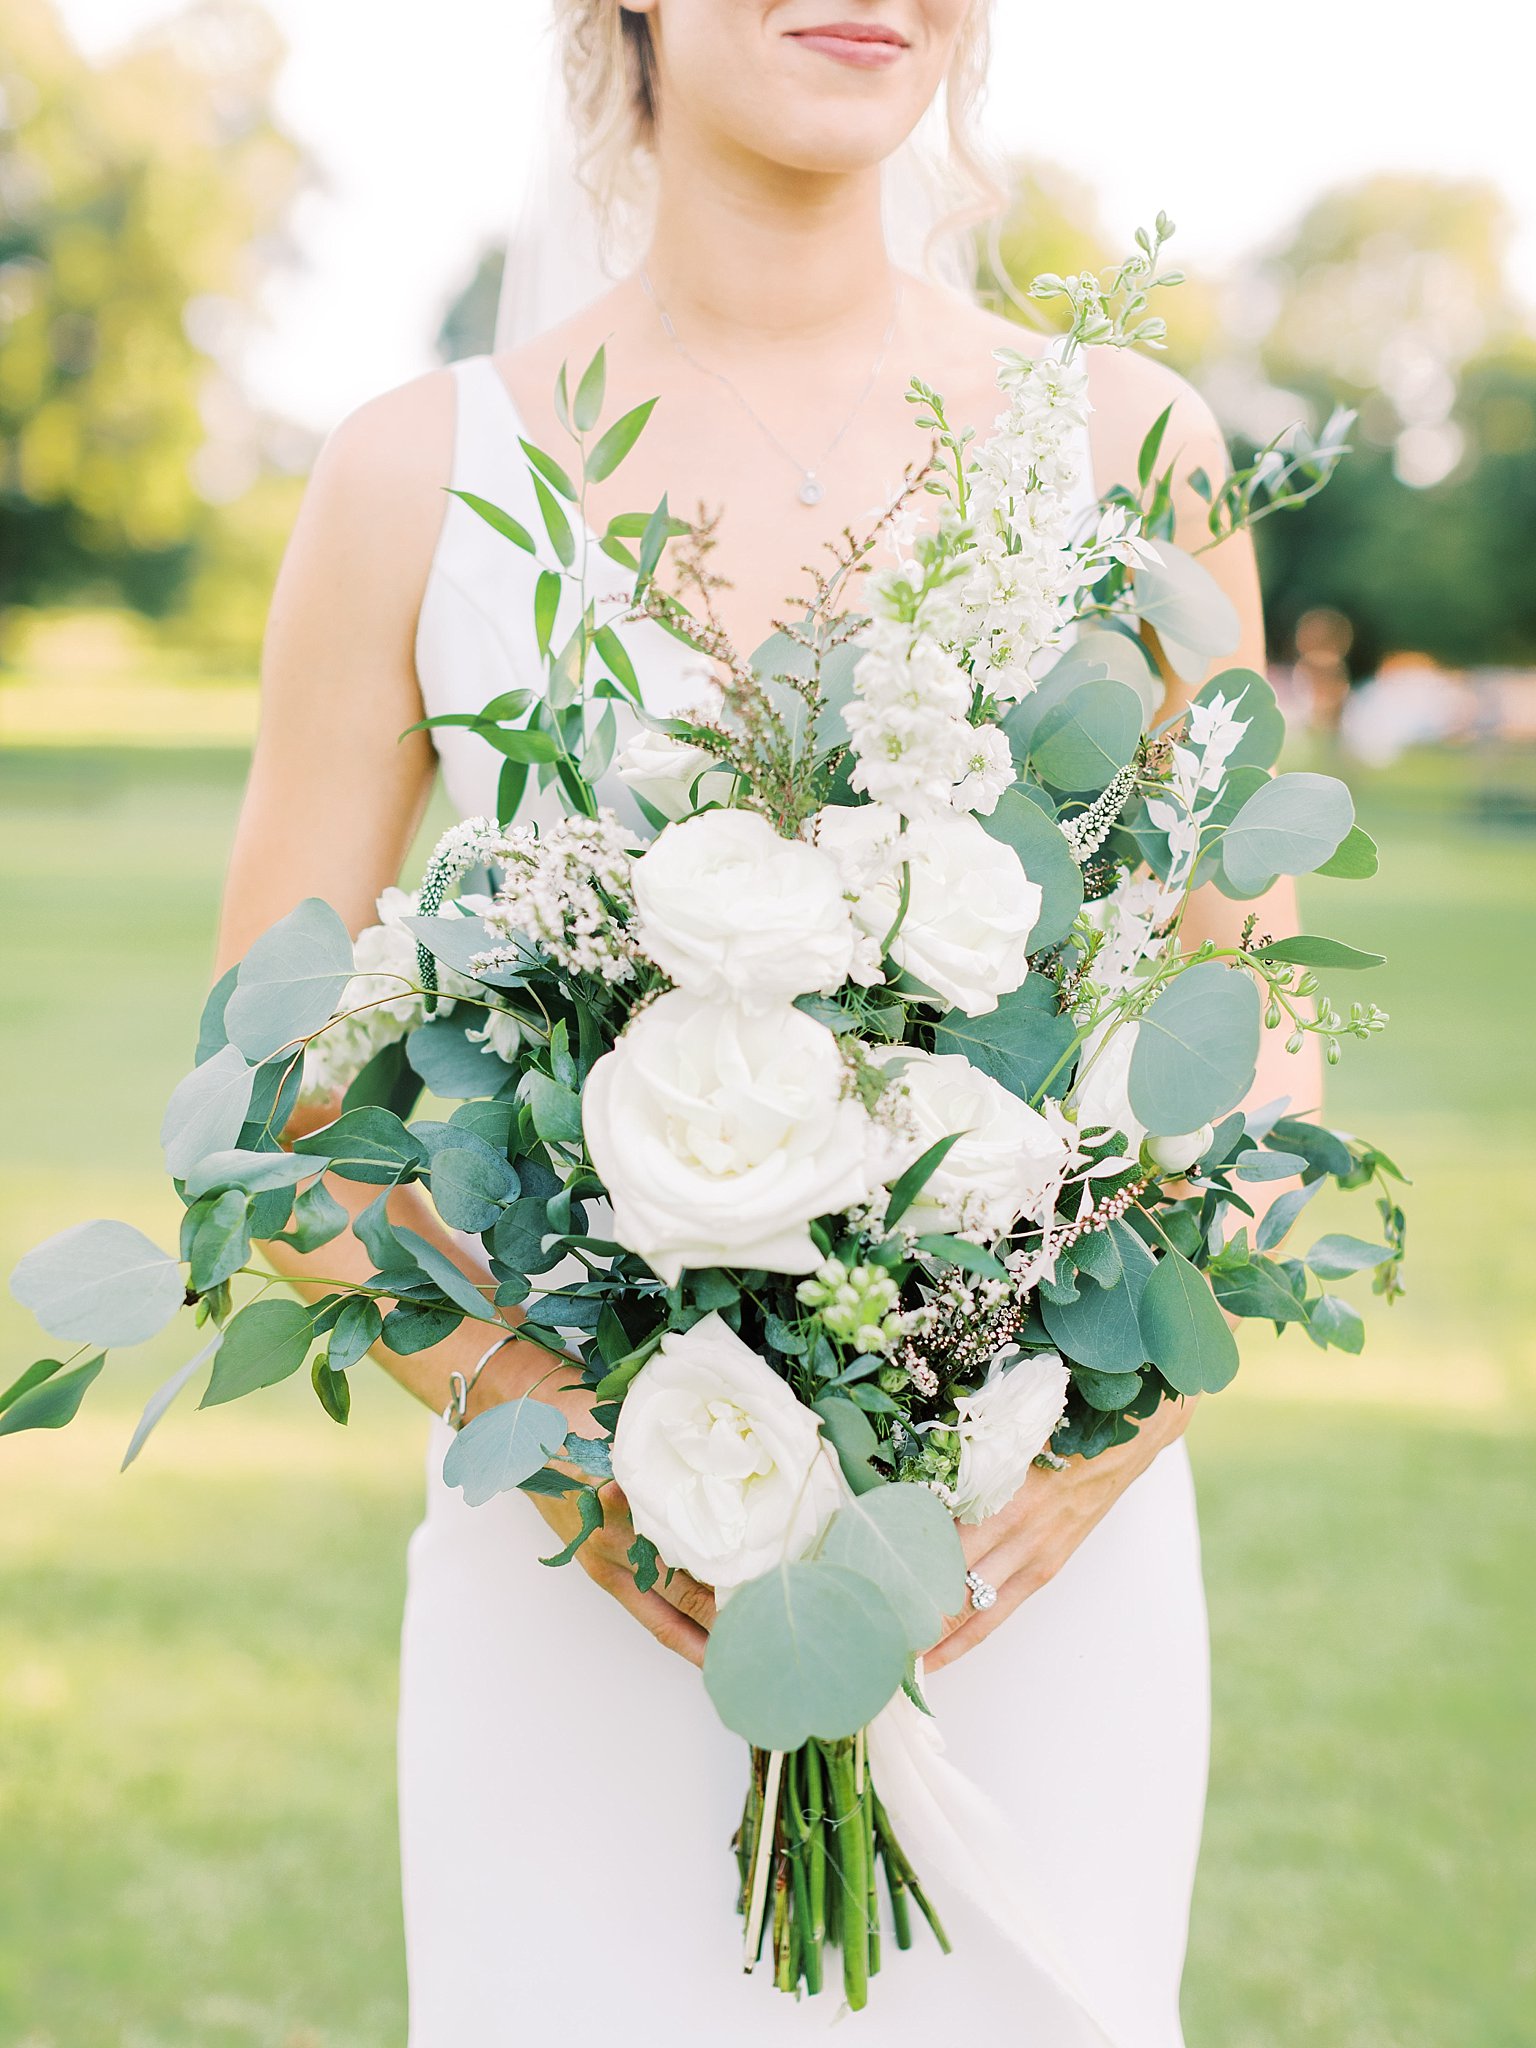 White bride bouquet at the orchard wedding in Texas